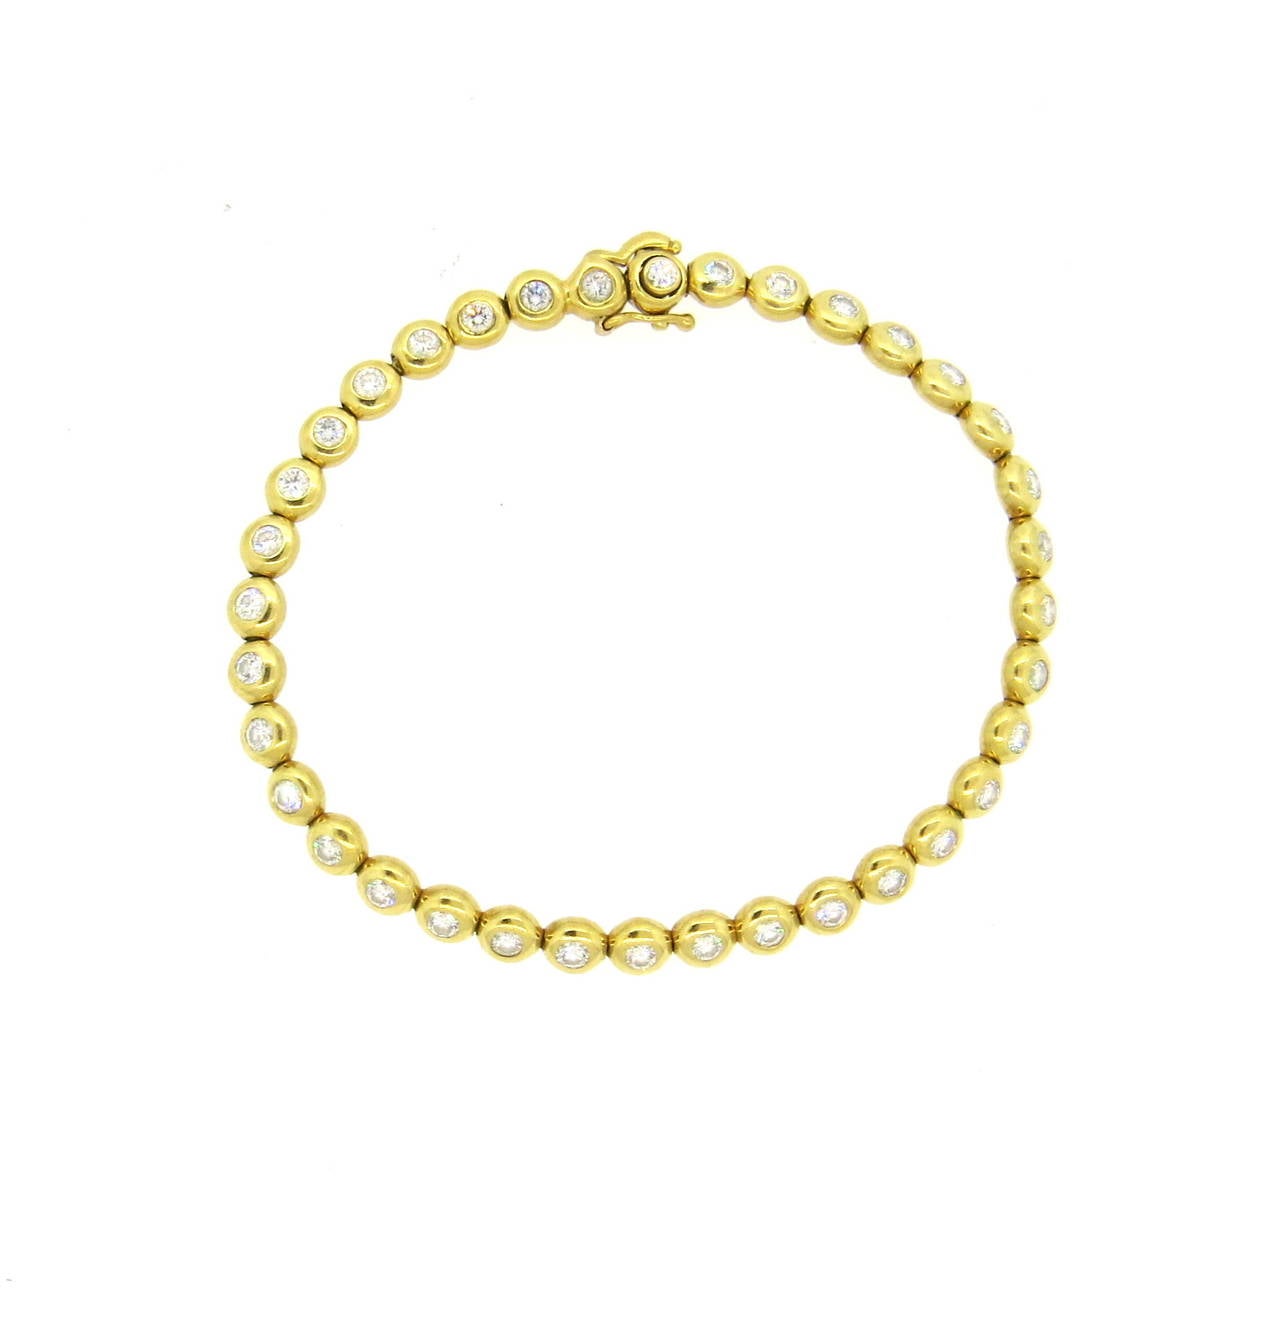 An 18k yellow gold bracelet set with approximately 2.20ctw of G/VS diamonds.  Crafted by Tiffany & Co, the bracelet is 7